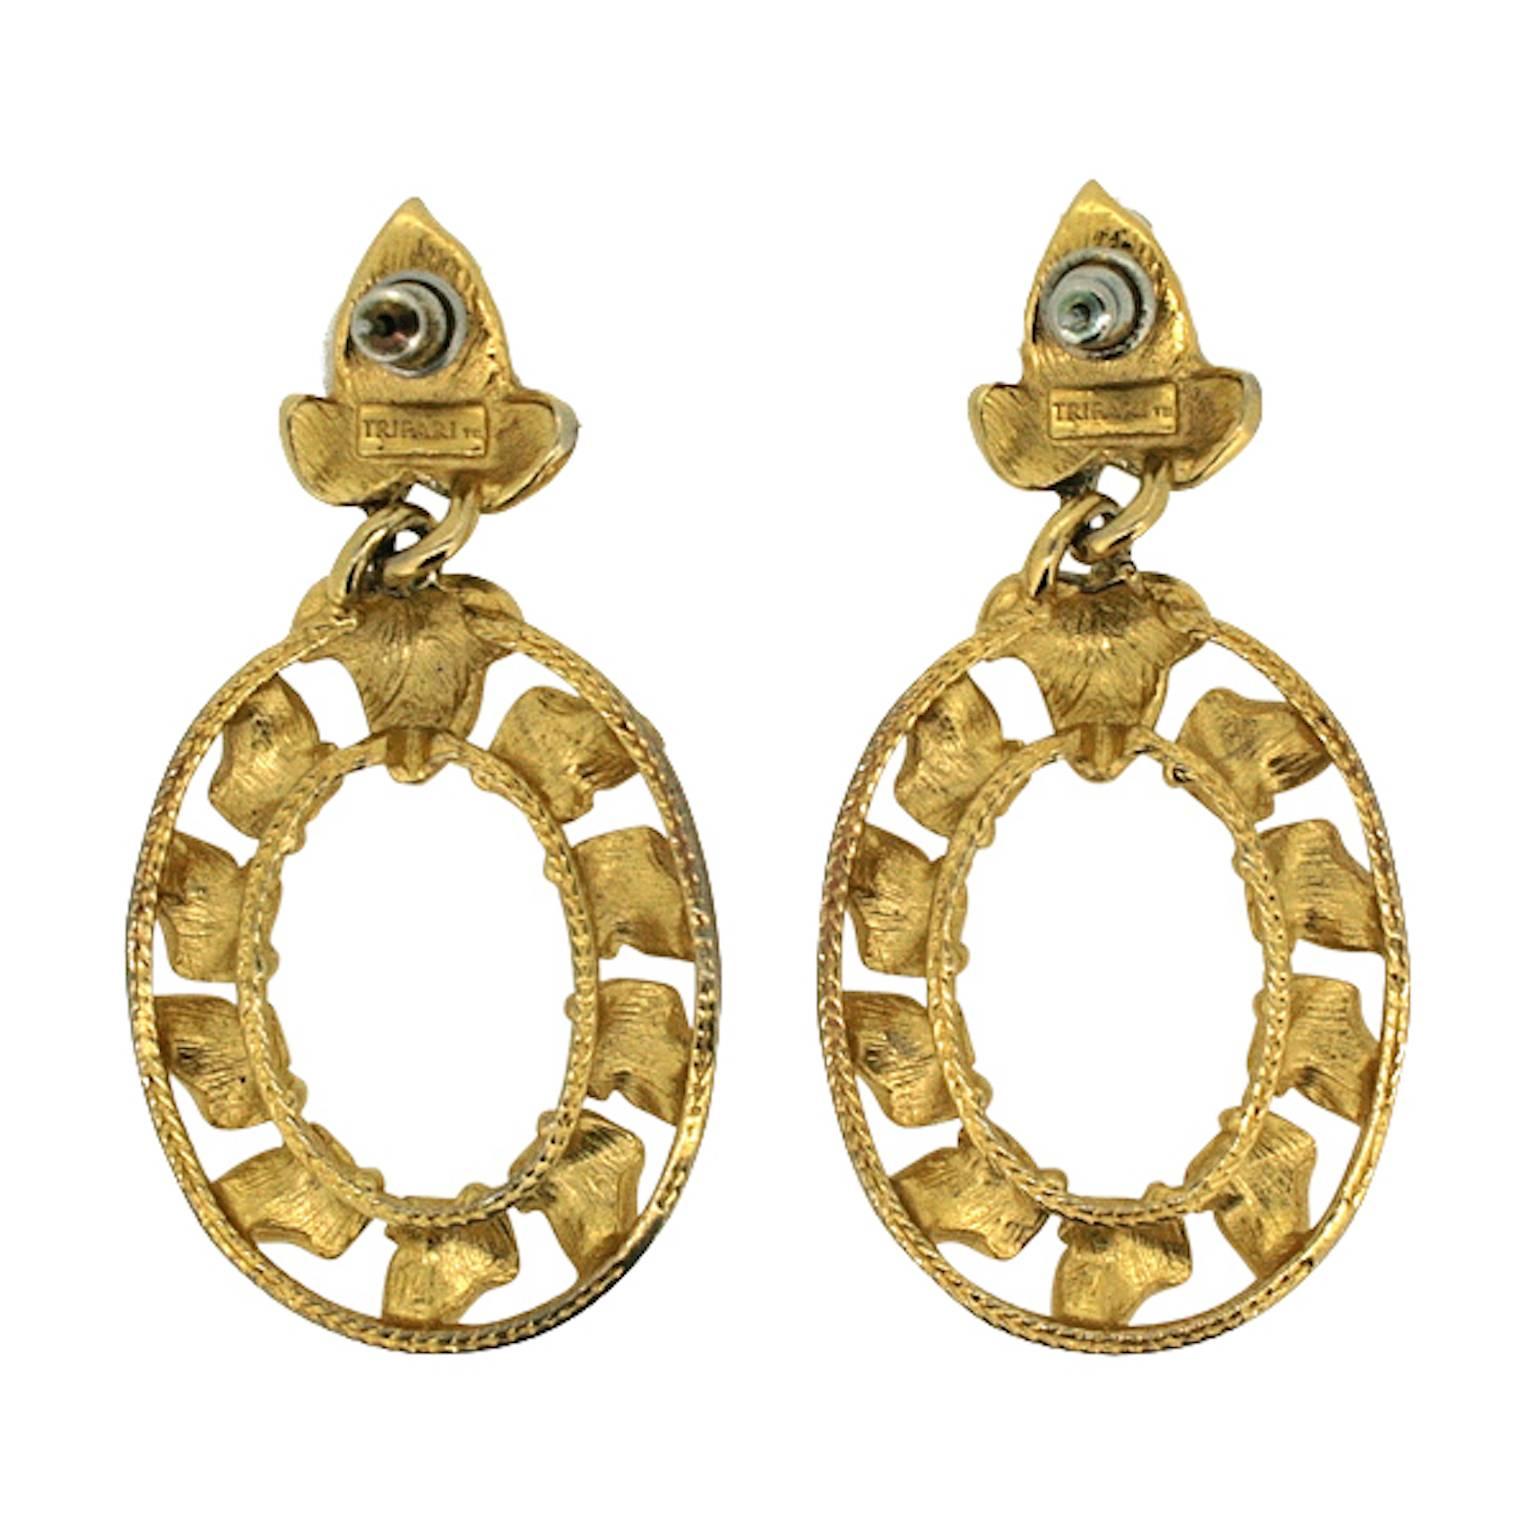 These glamorous drop earrings are for pierced ears and were made in the 1980s by Trifari.
Condition Report:
Excellent
The Details...
These gold tone earrings feature an 'Ivy leaf' motif in a hoop style design. They measure 3cm x 5cm. The earrings